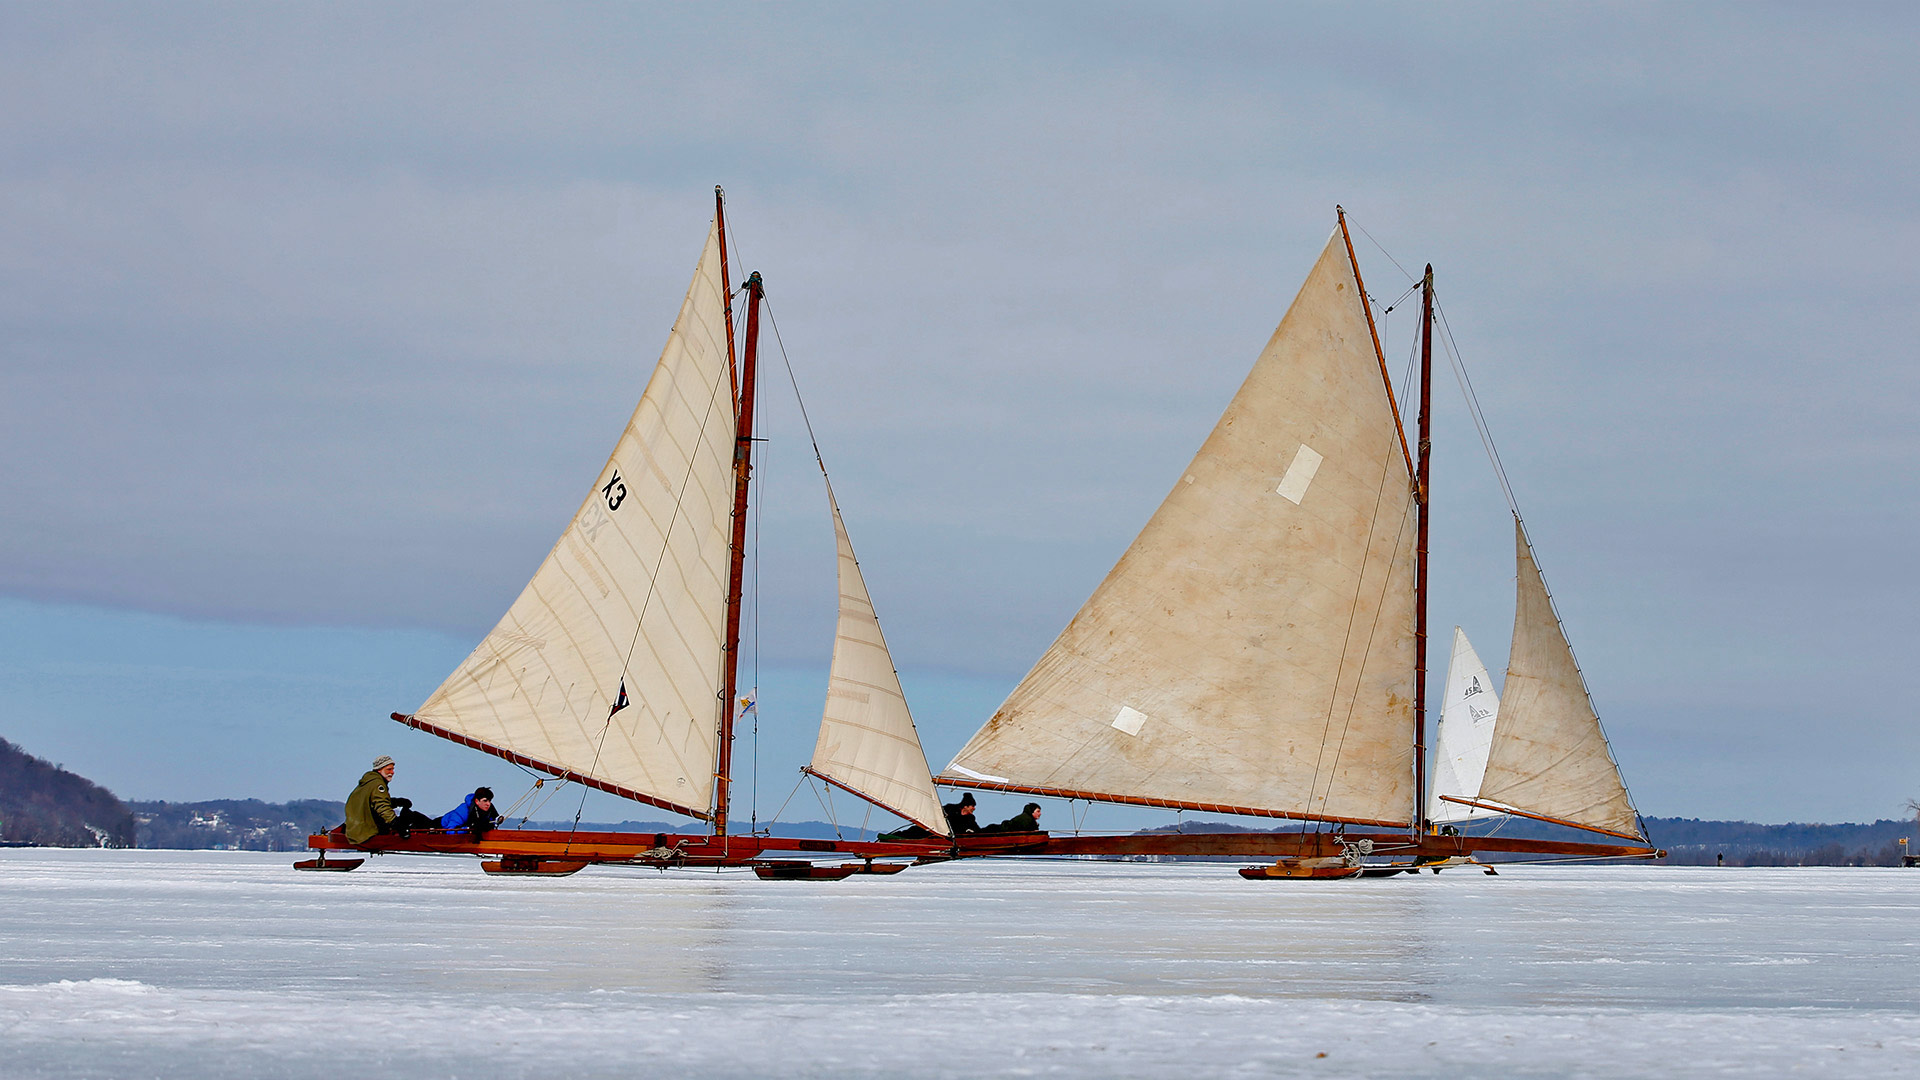 Sailing on thick ice